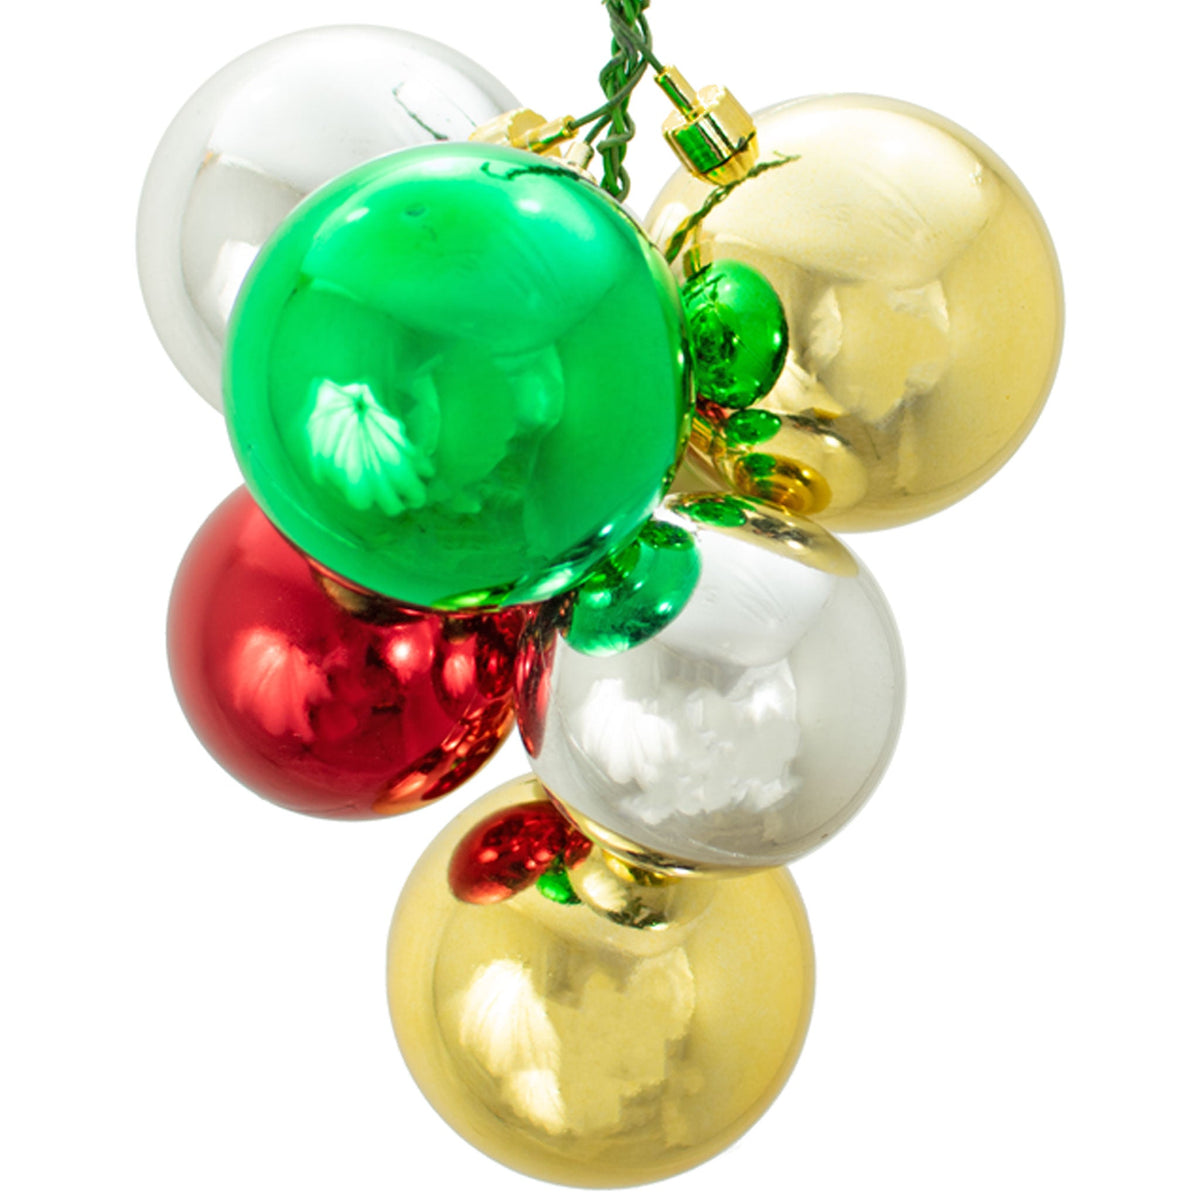 The Stockton Christmas Ball Clusters with Shiny Multi-Color Ornaments